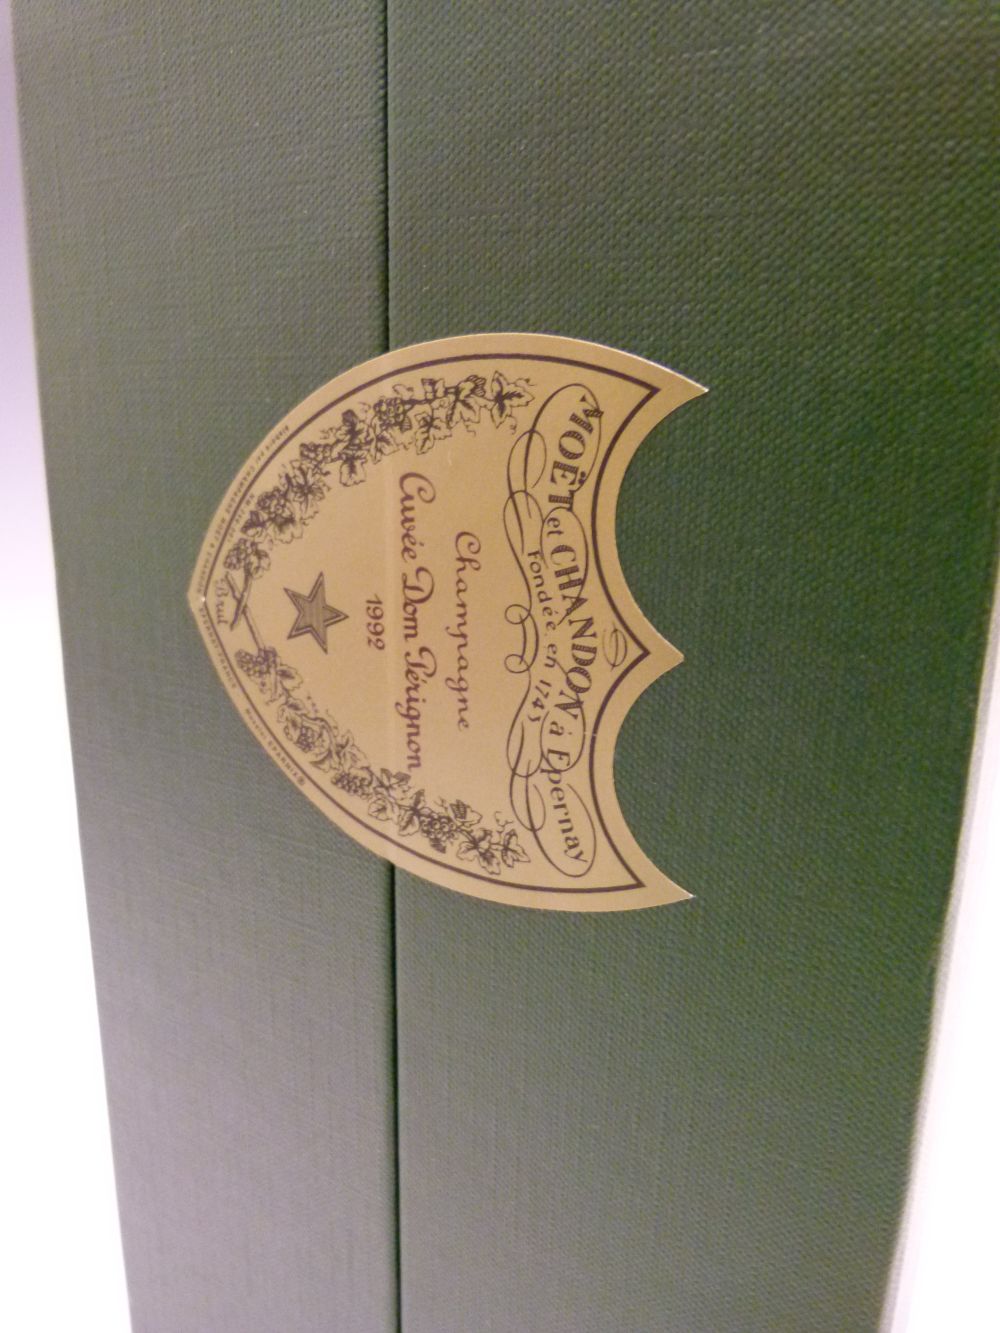 Magnum of Dom Perignon Champagne, 1992 vintage, in sealed presentation box (1) Condition: Box is - Image 4 of 6